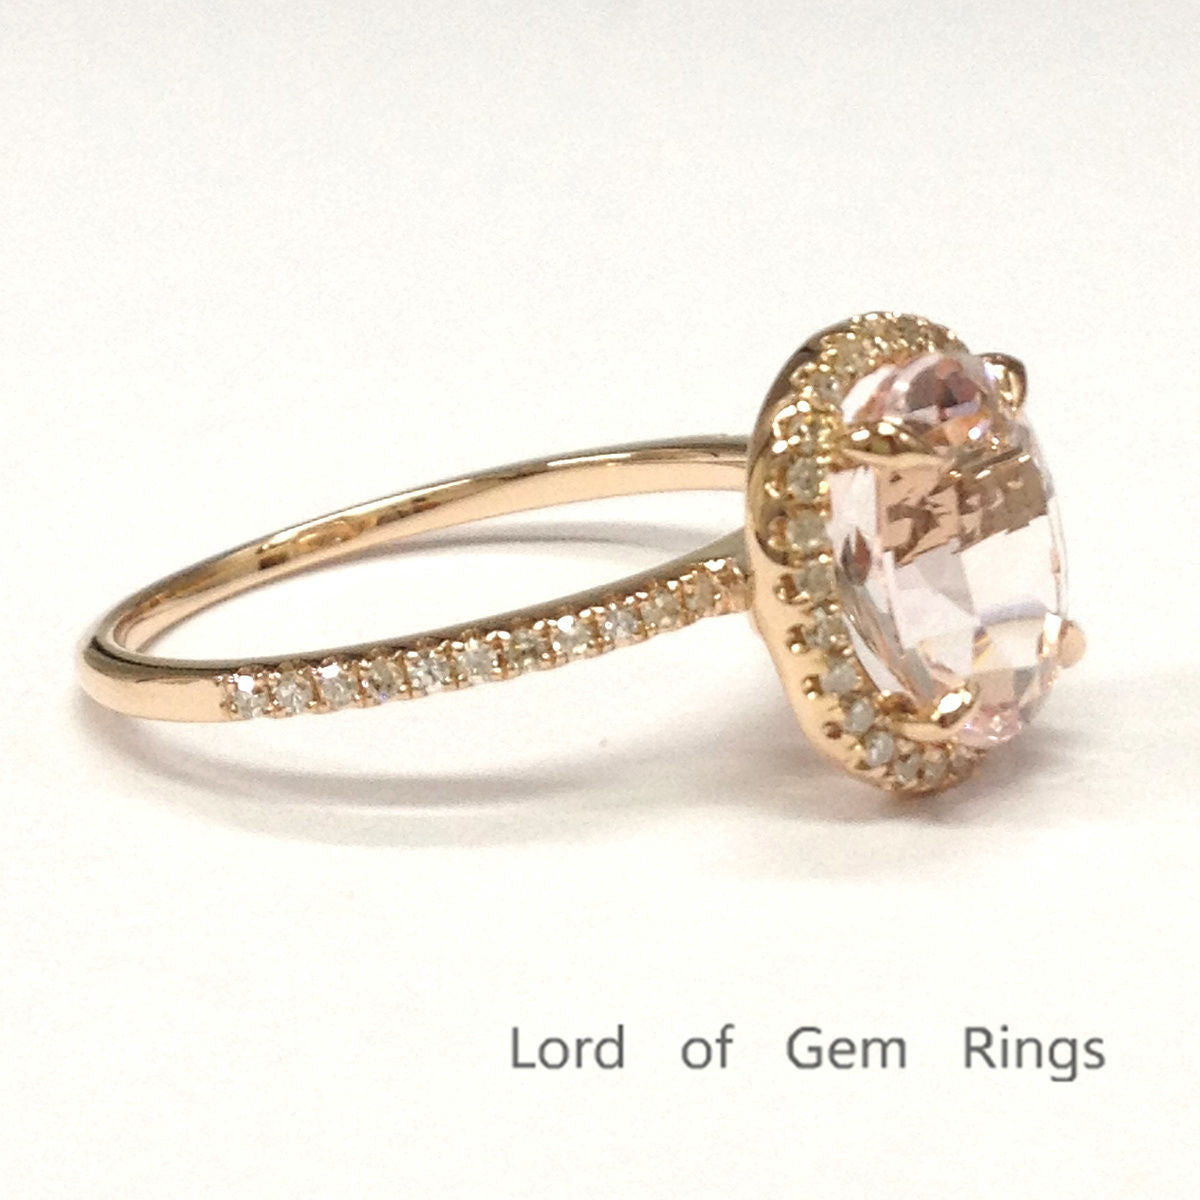 Oval Morganite Engagement Ring Pave Diamond Wedding 14K Rose Gold 7x9mm - Lord of Gem Rings - 3